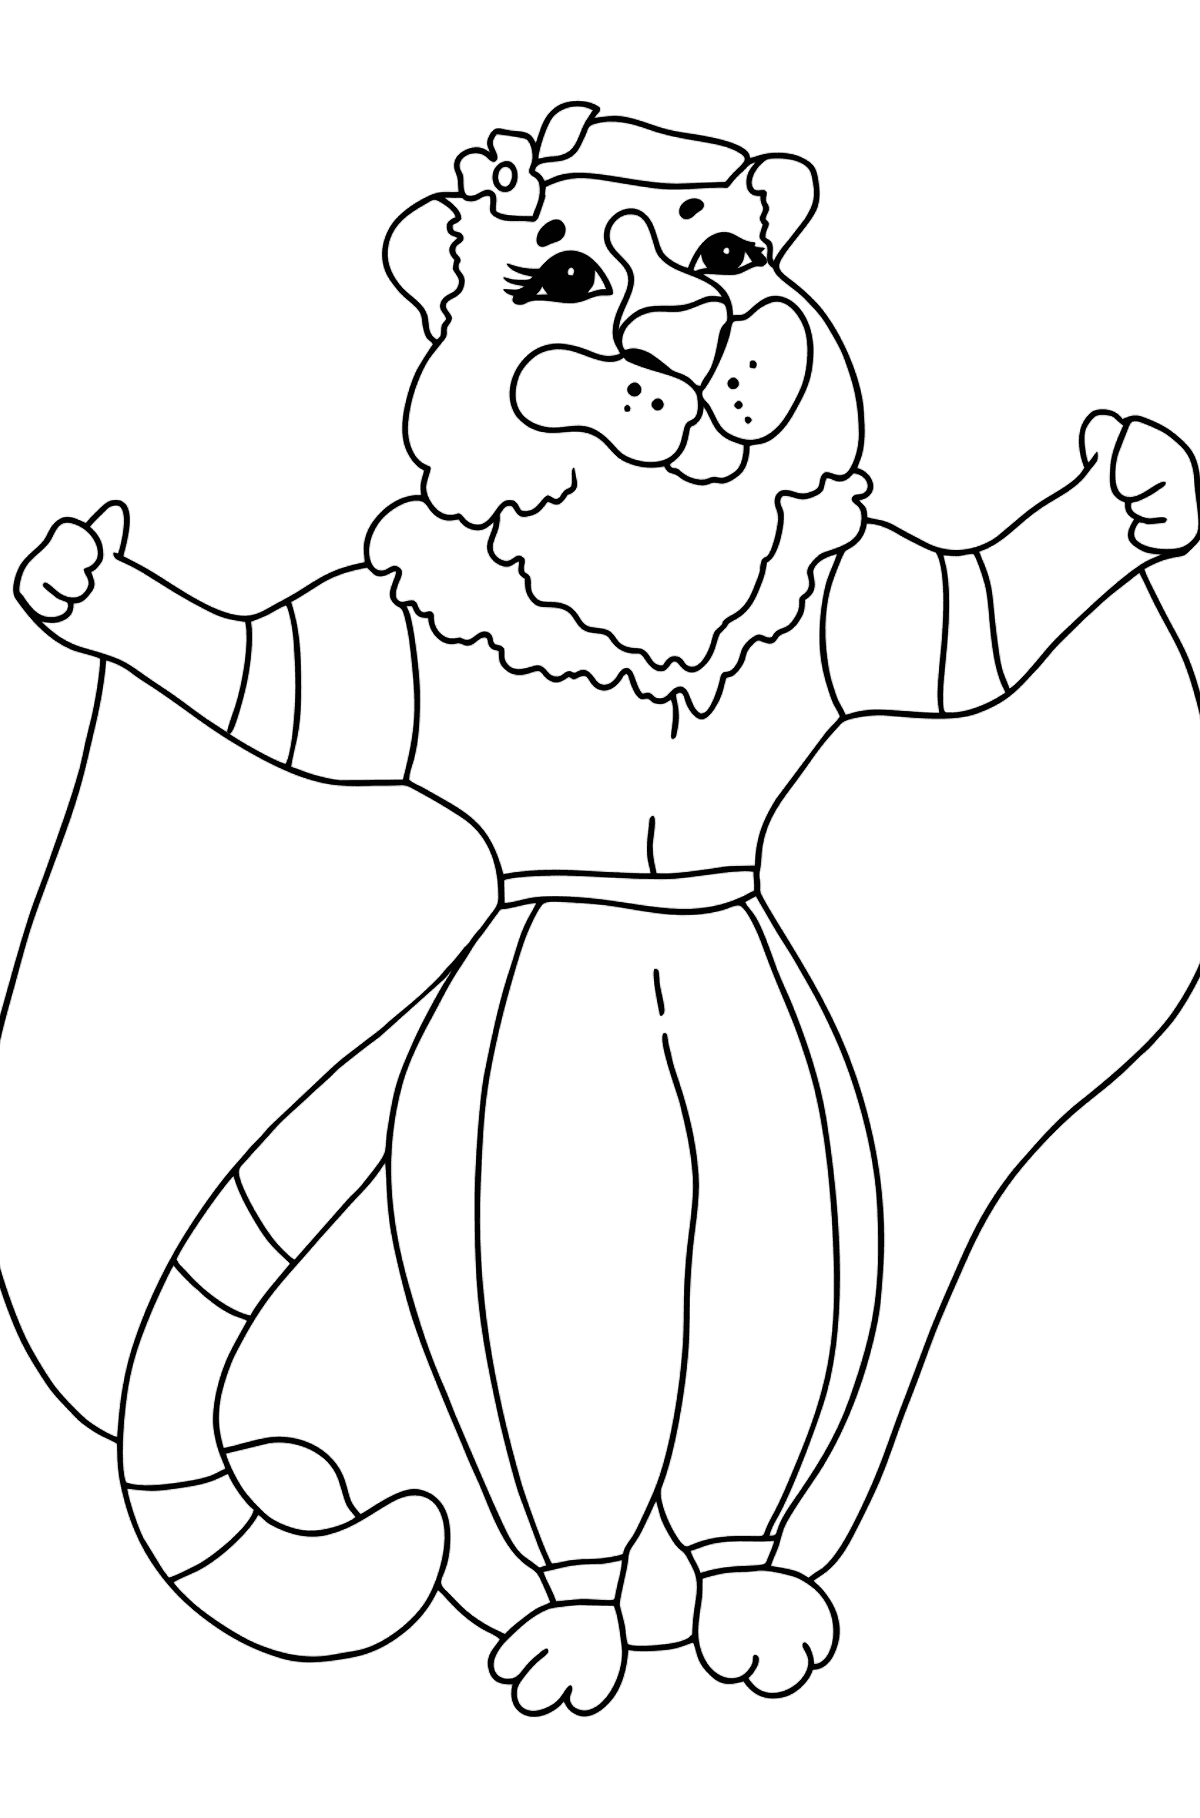 Coloring Page - A Skillful Tigress with a Jump Rope - Coloring Pages for Kids